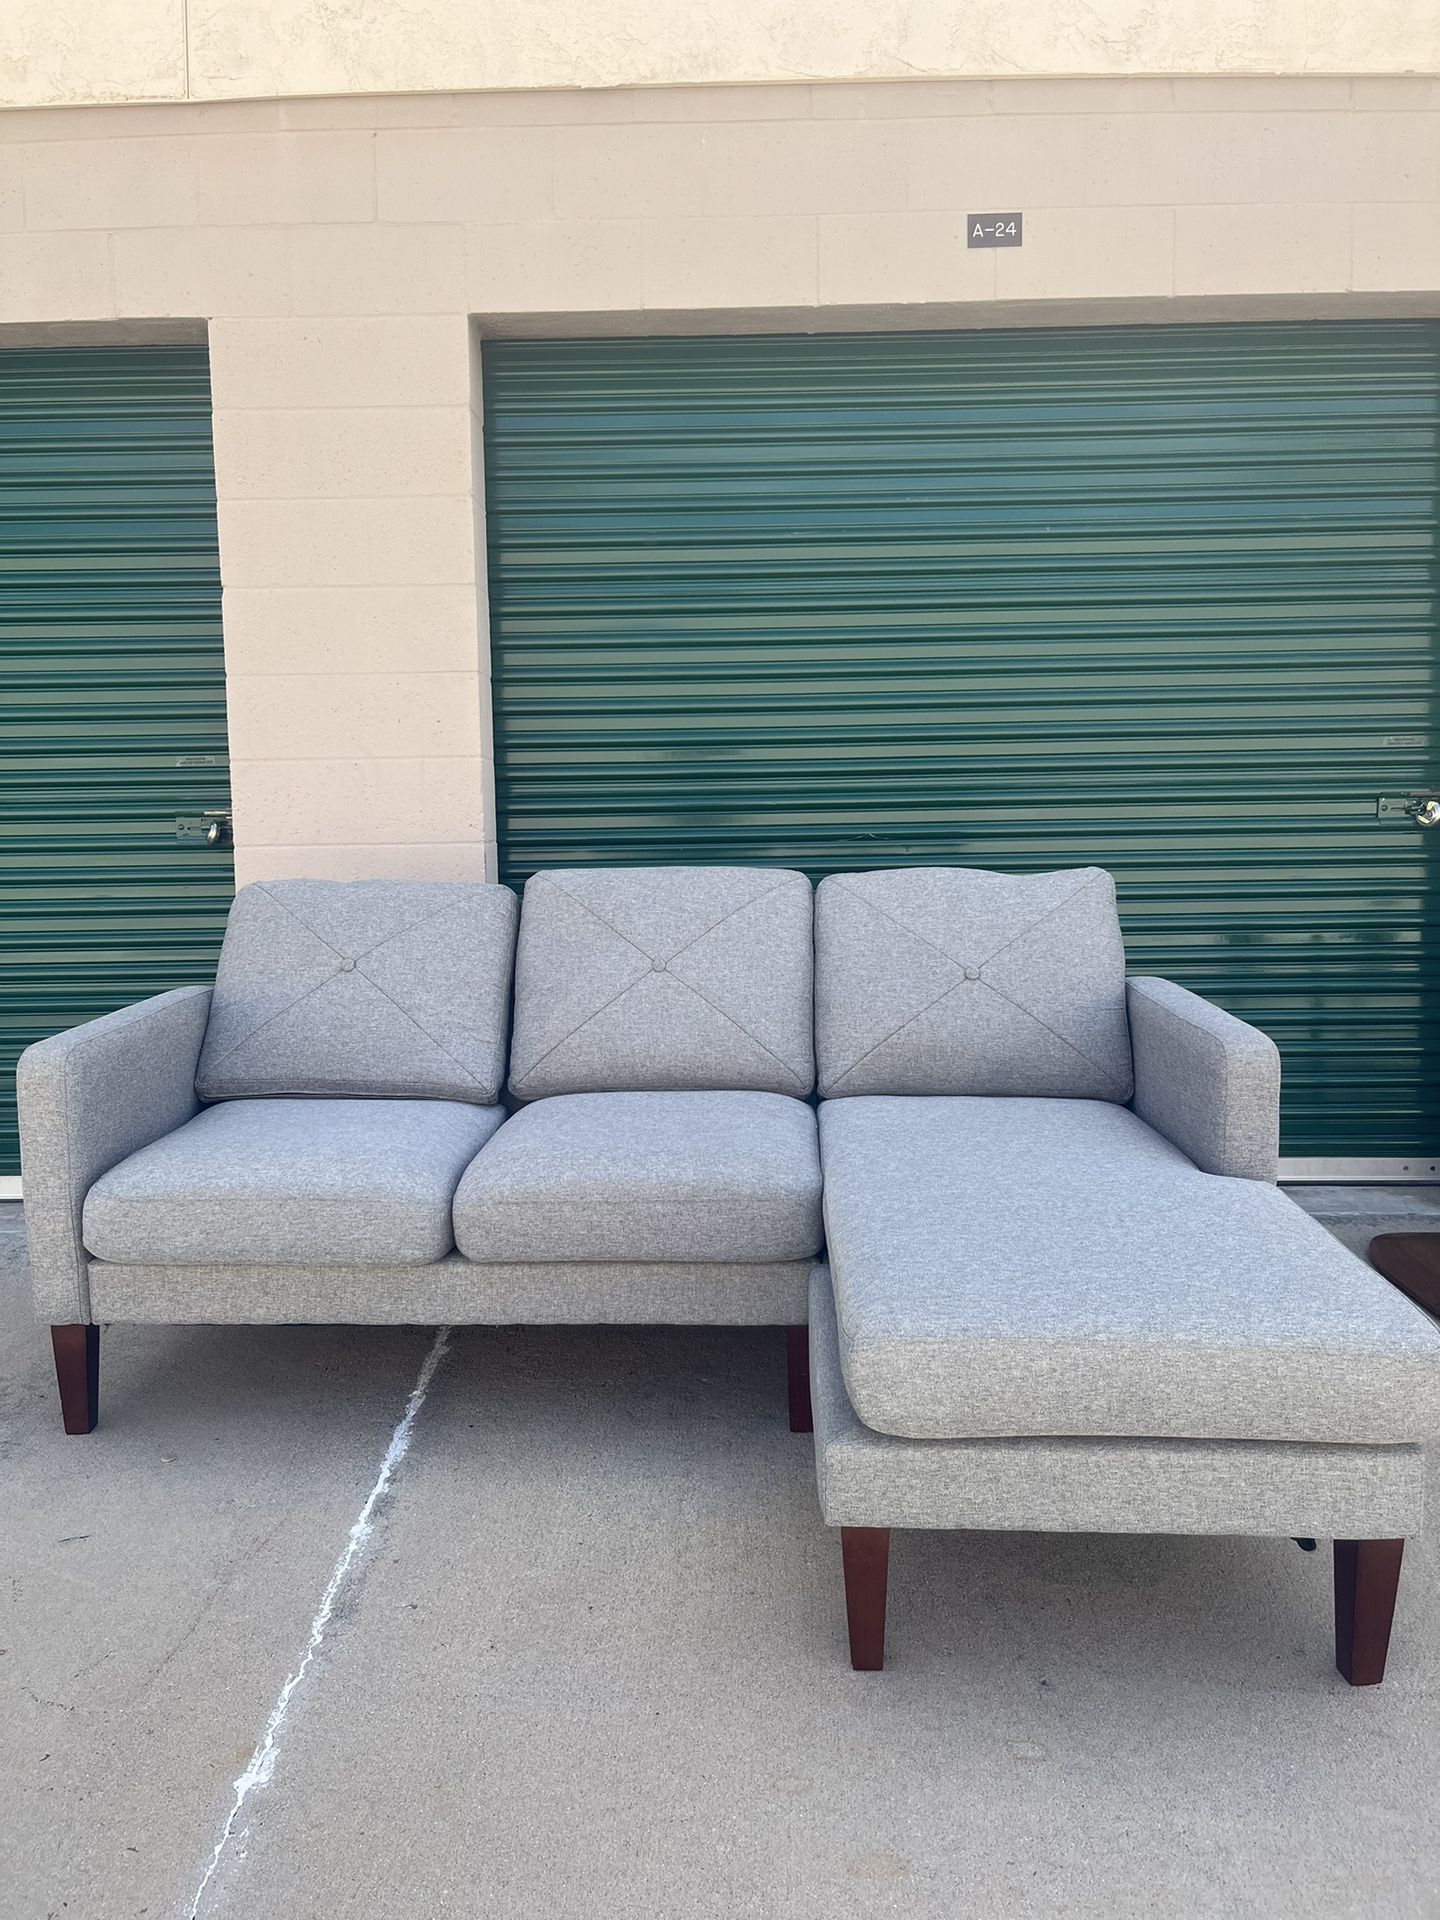 Midcentury Modern Sectional Couch With Wooden Legs And Reversible Chaise *Delivery Available*